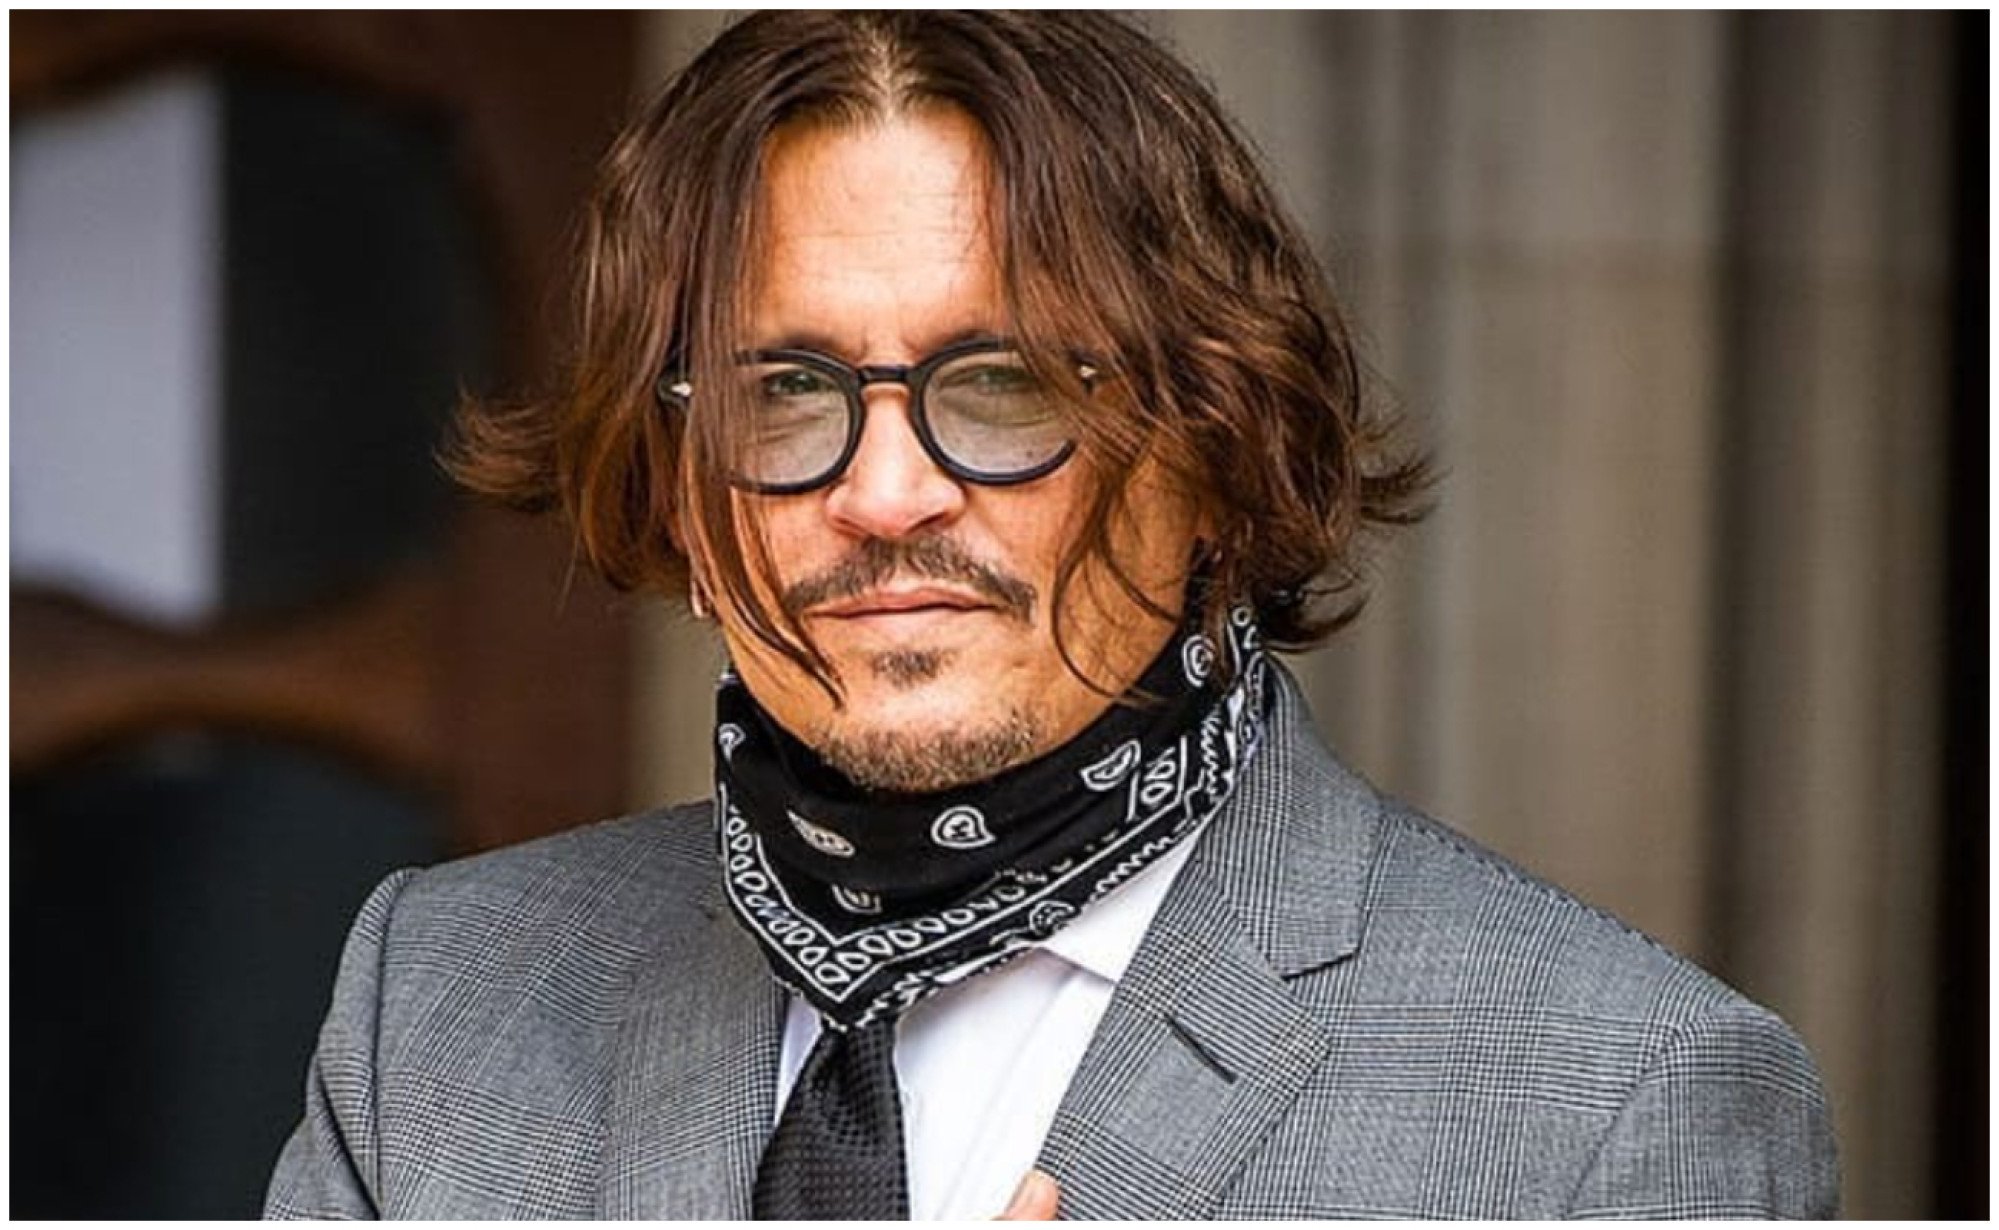 Johnny Depp’s career came under fire earlier this year. Photo: @johnny.deep.fan/Instagram